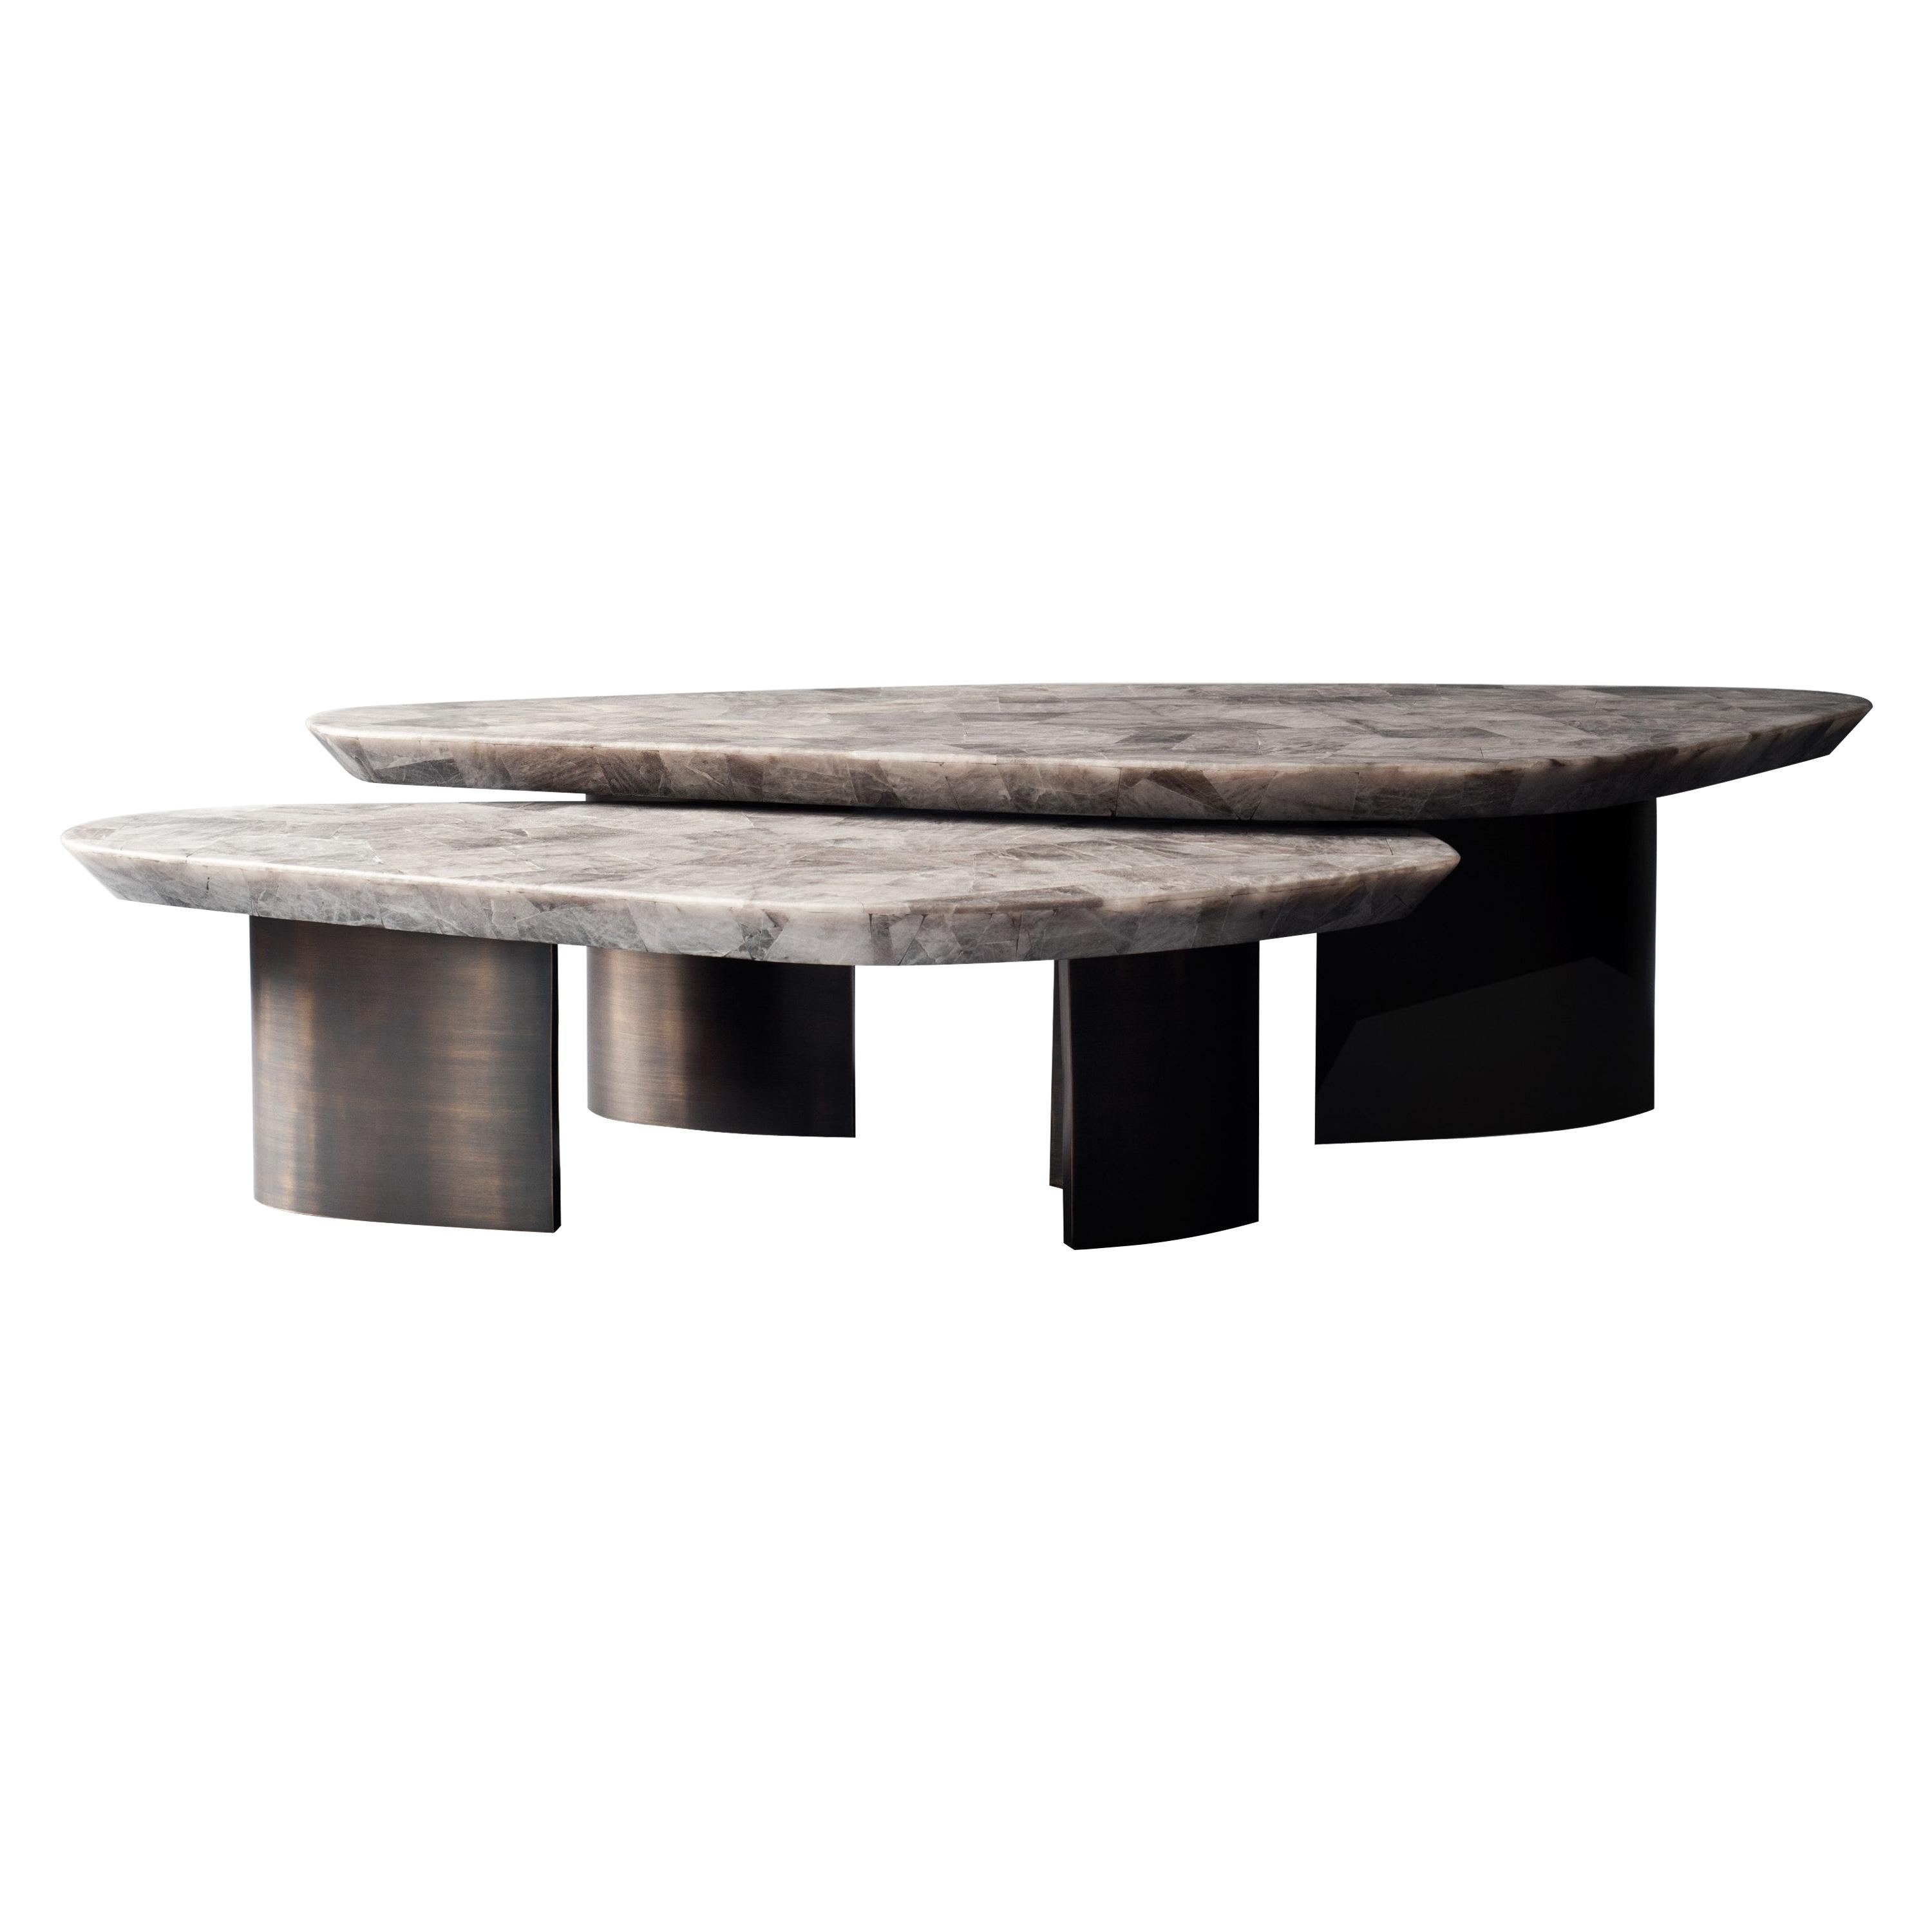 Ledge Table Nested by DeMuro Das in Smokey Quartz with Antique Brass Base For Sale